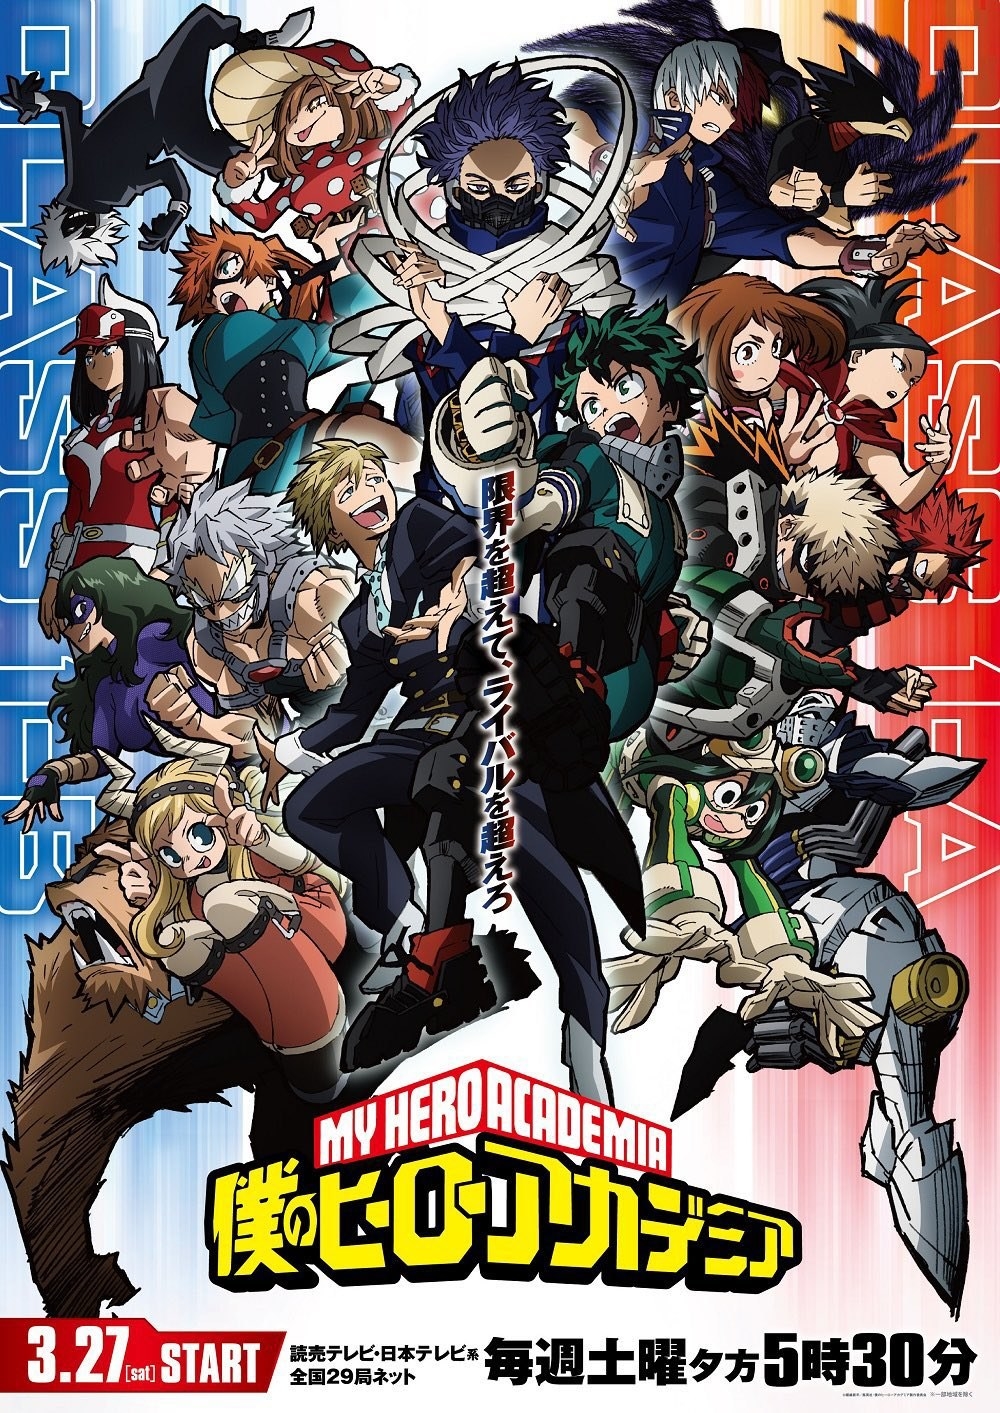 a poster for My Hero Academia with animated characters